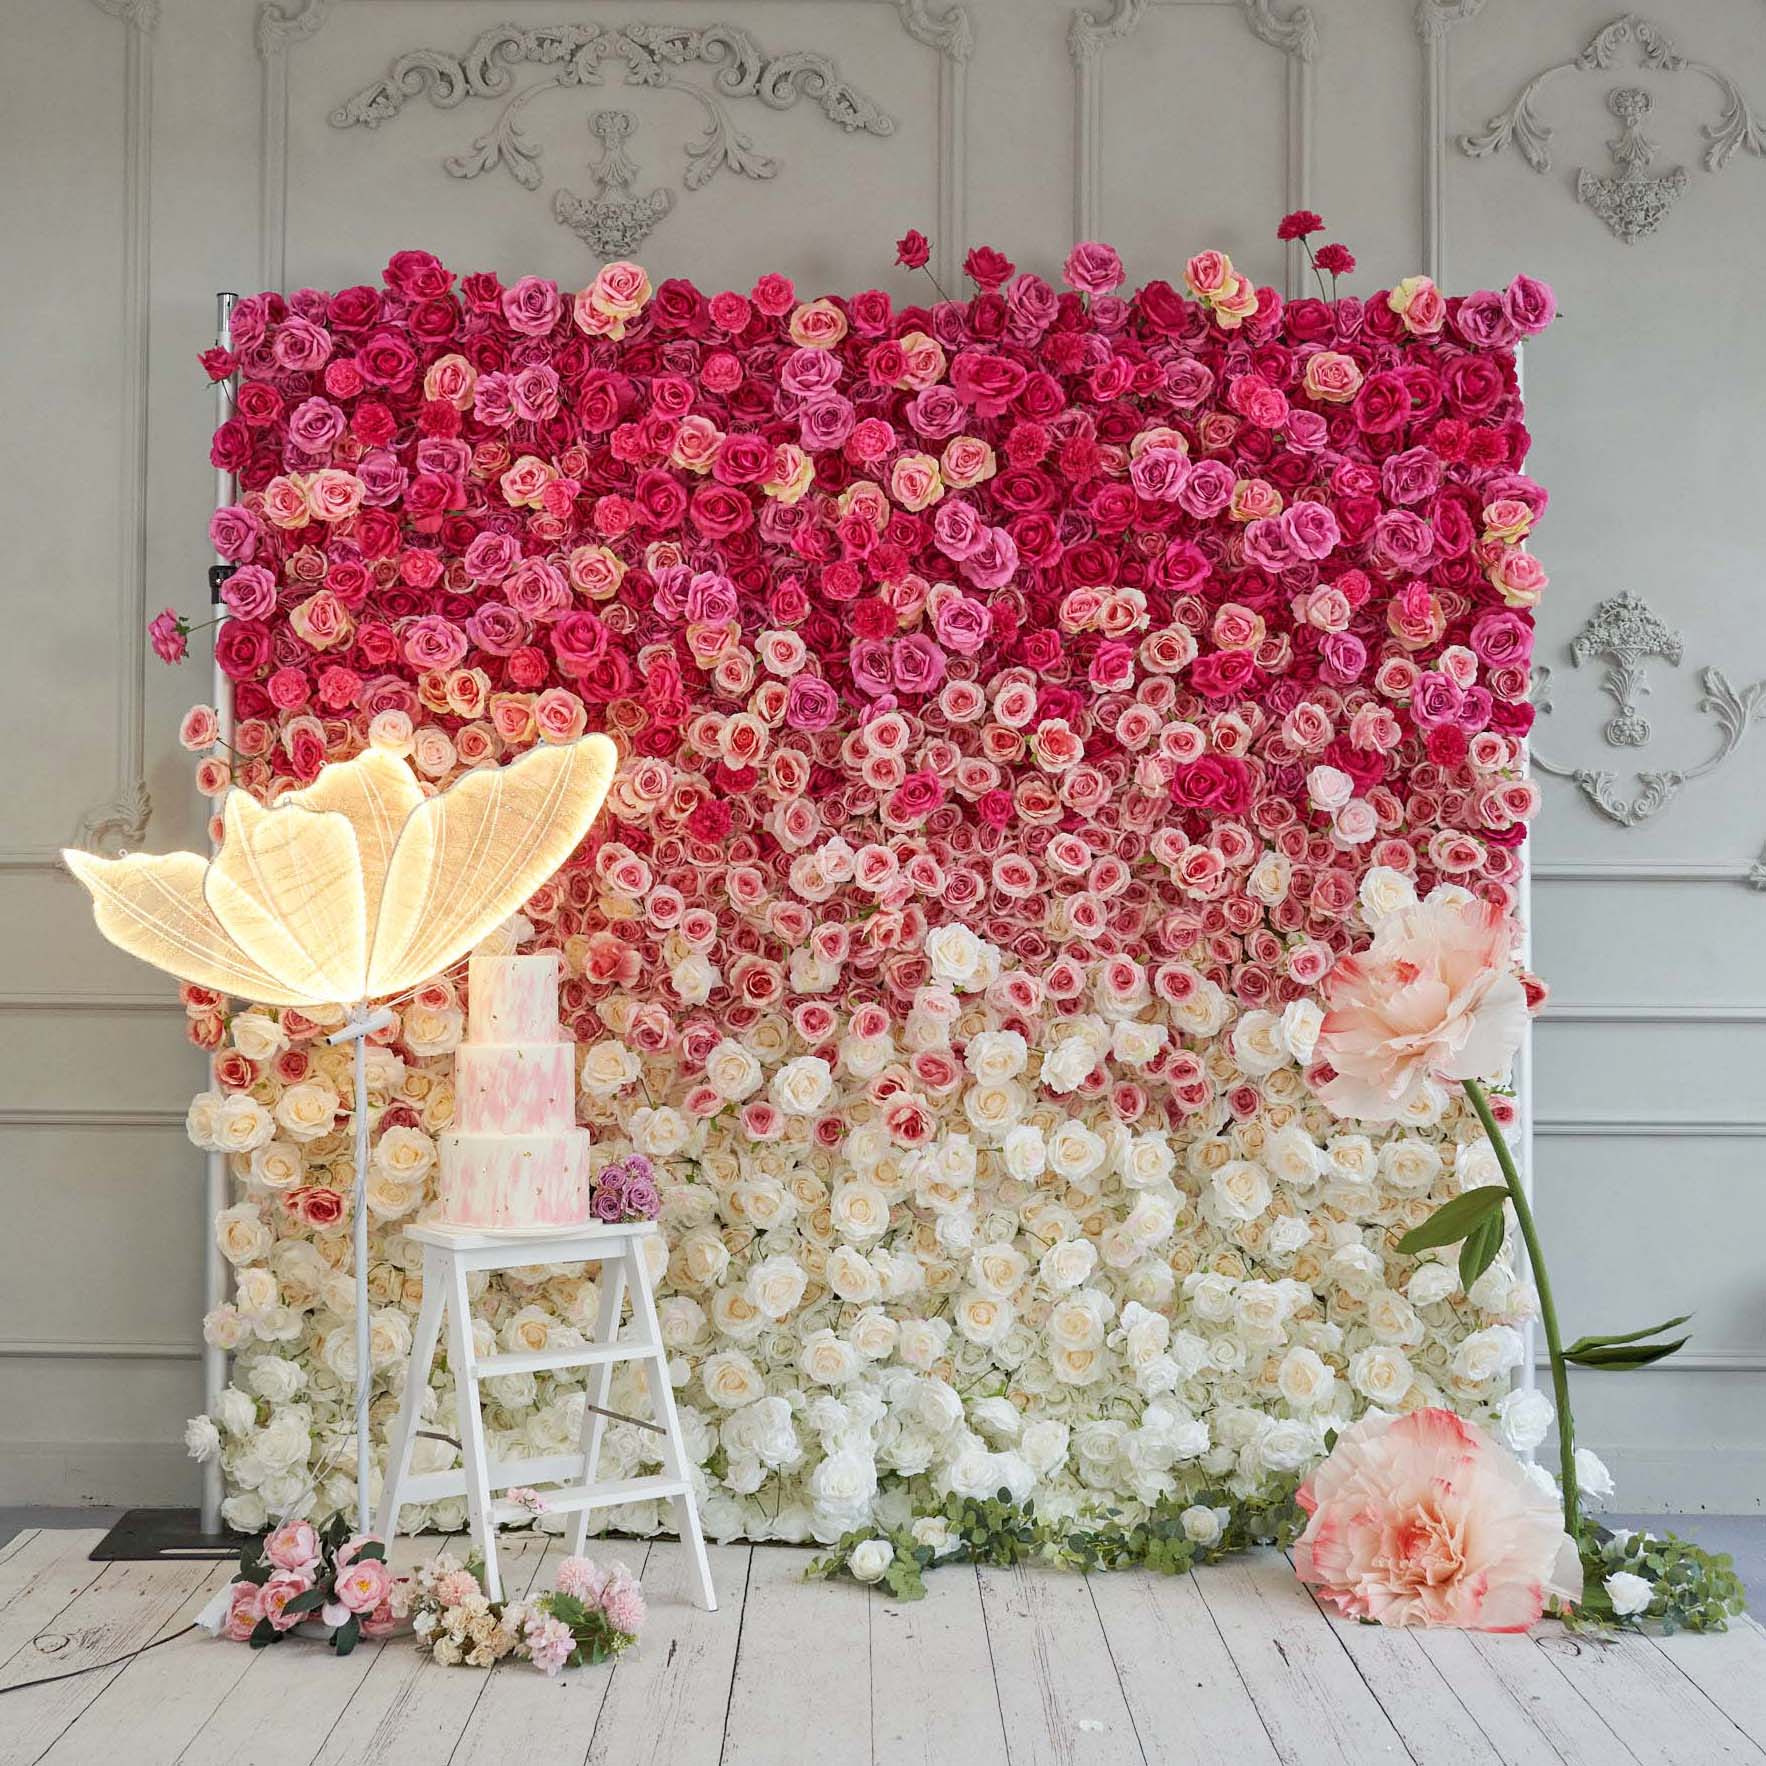 Flower Wall 5D Gradient Rose Red Fabric Rolling Up Curtain Floral Backdrop Wedding Party Proposal Decor